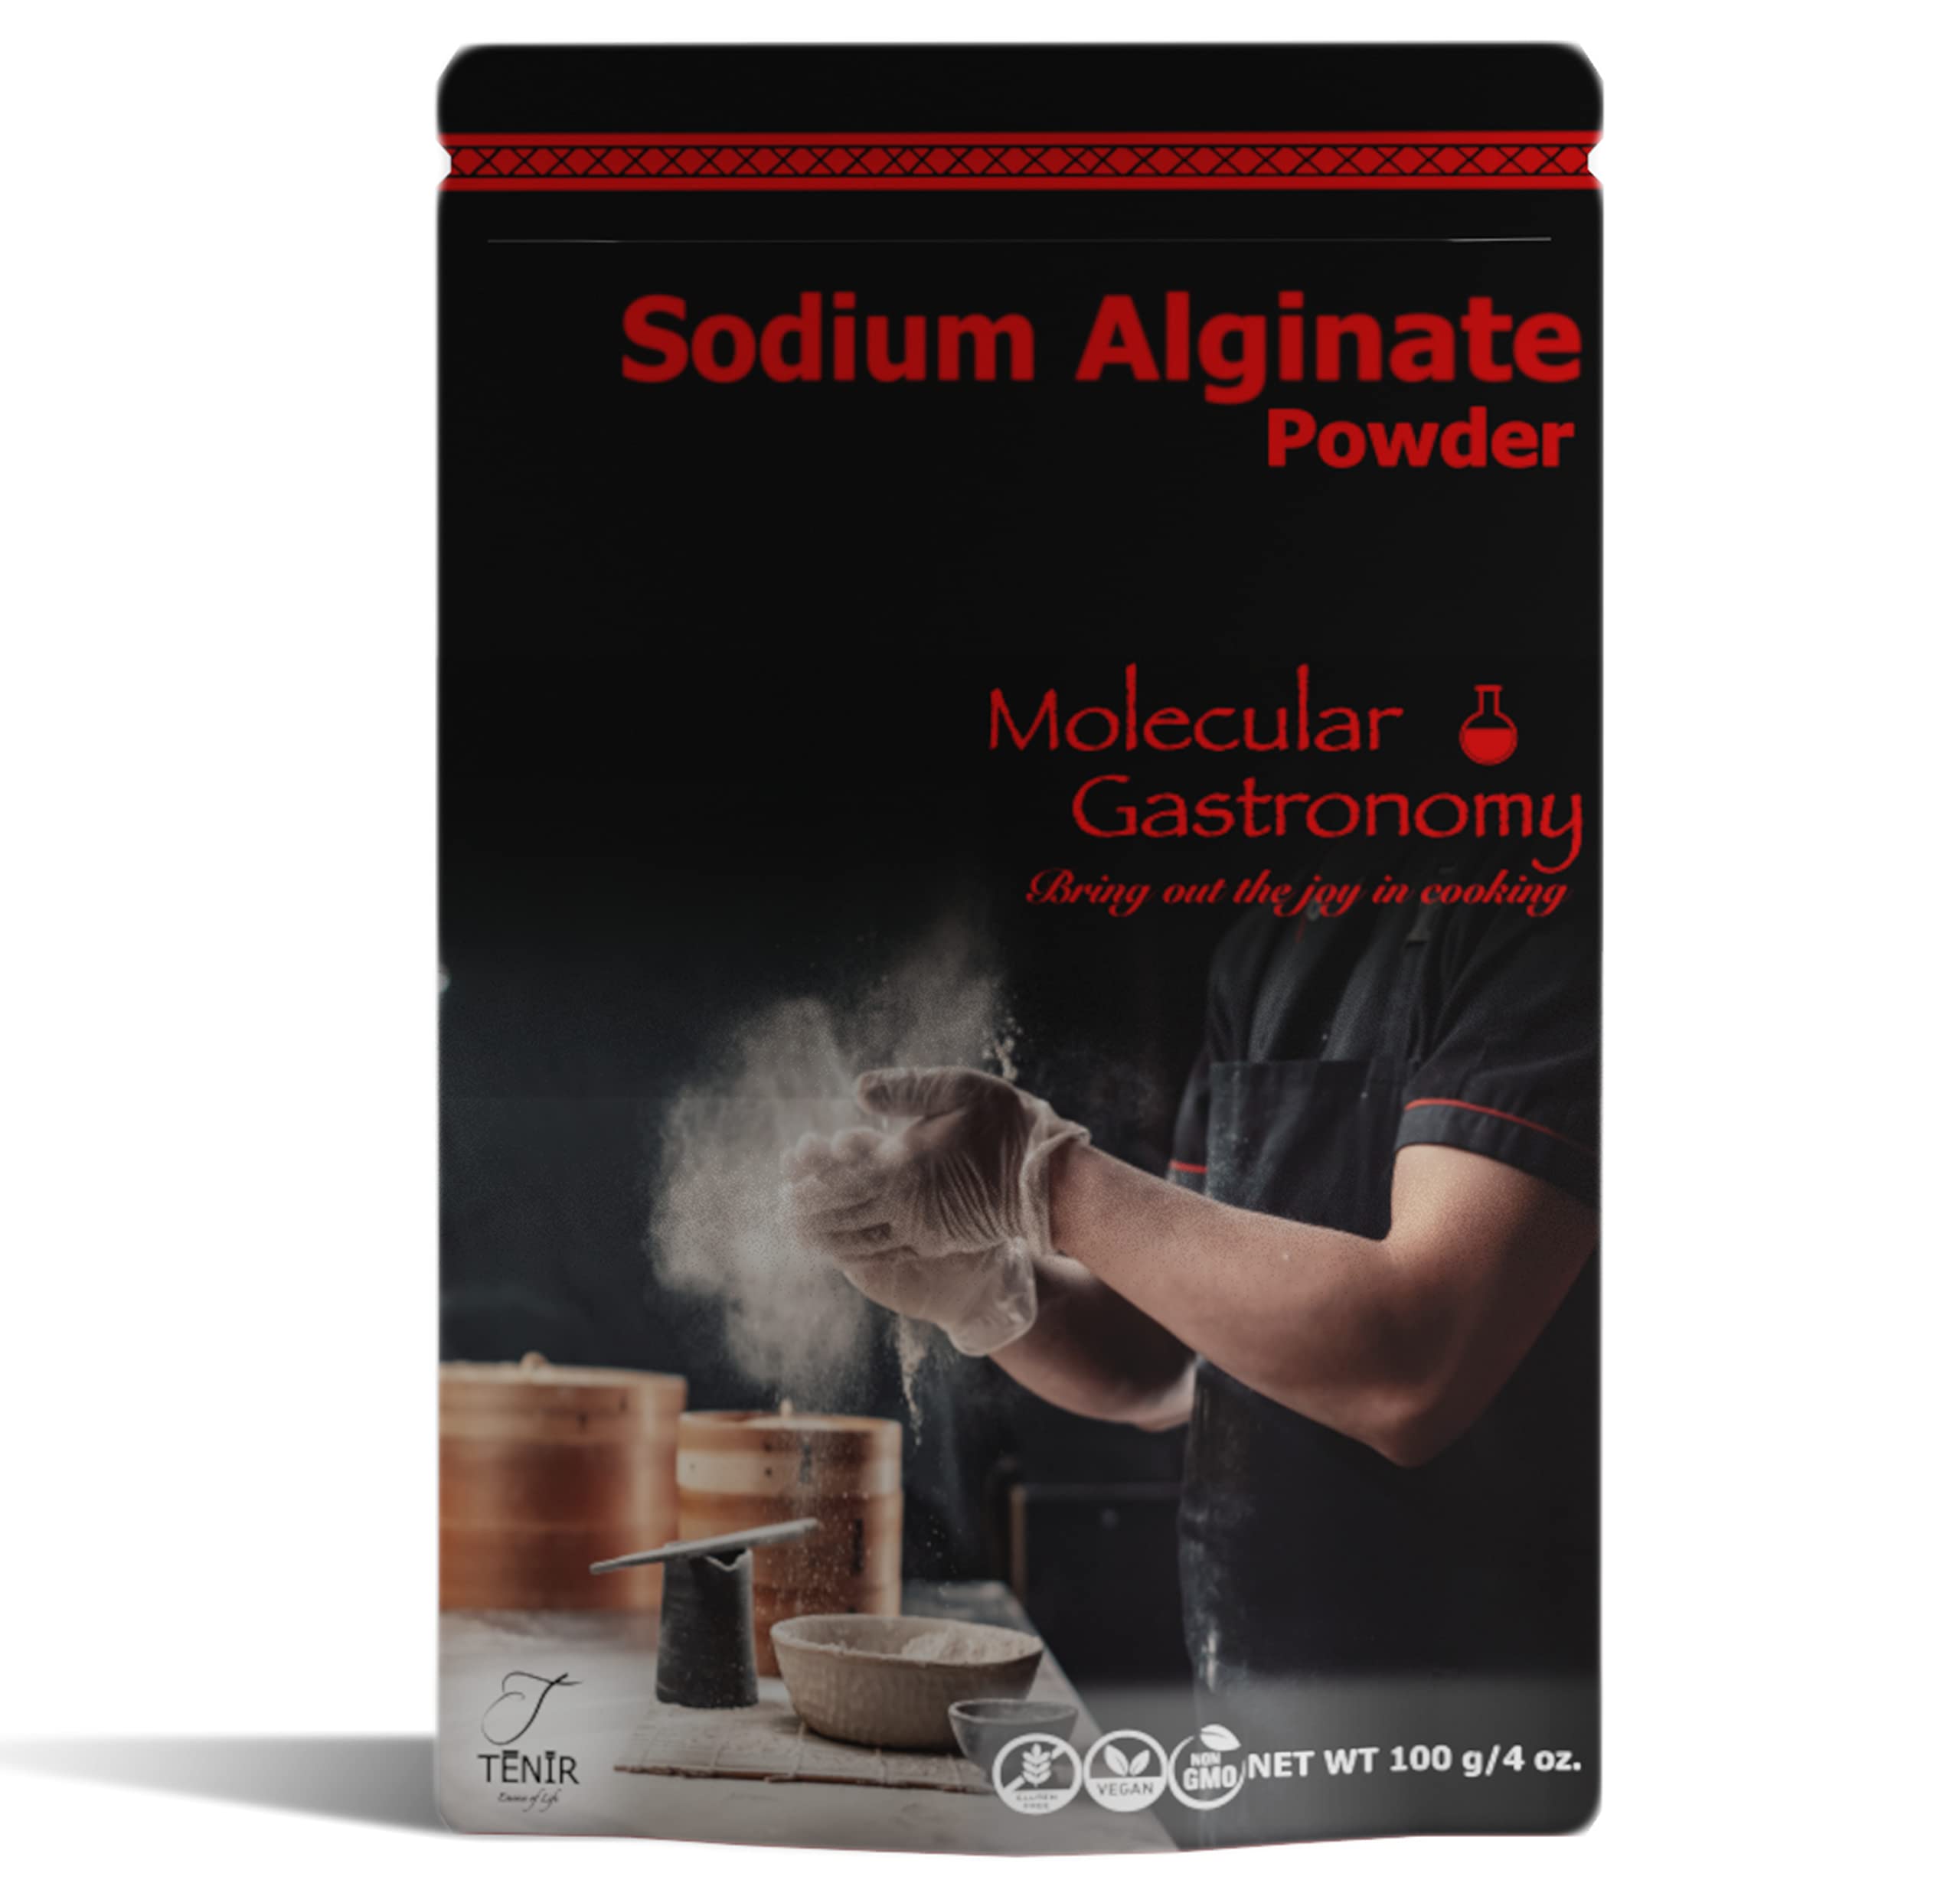 Sodium Alginate 100% Food Grade | Natural Thickening Powder & Gelling Agent  for Cooking (8 Oz)…